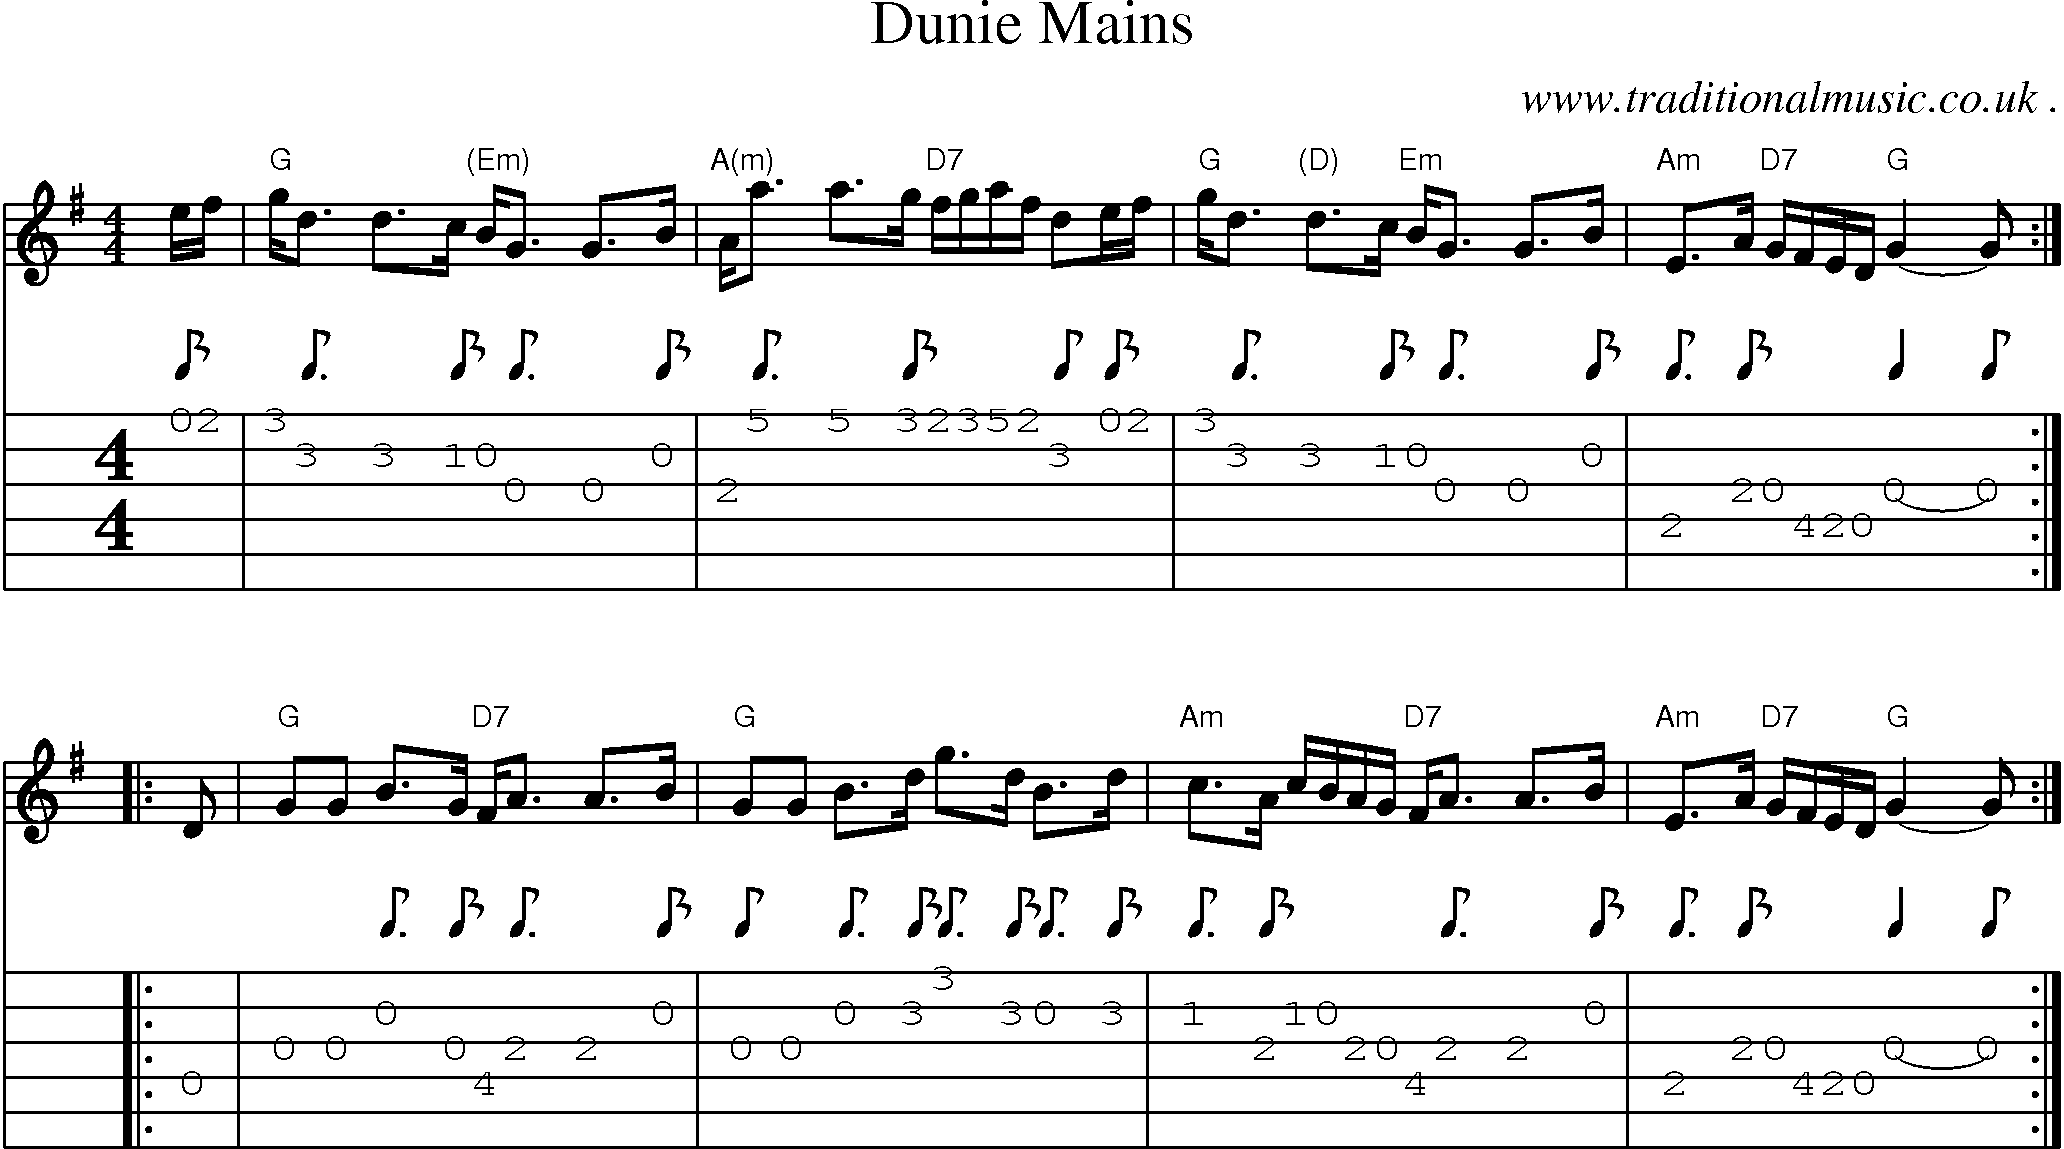 Sheet-music  score, Chords and Guitar Tabs for Dunie Mains